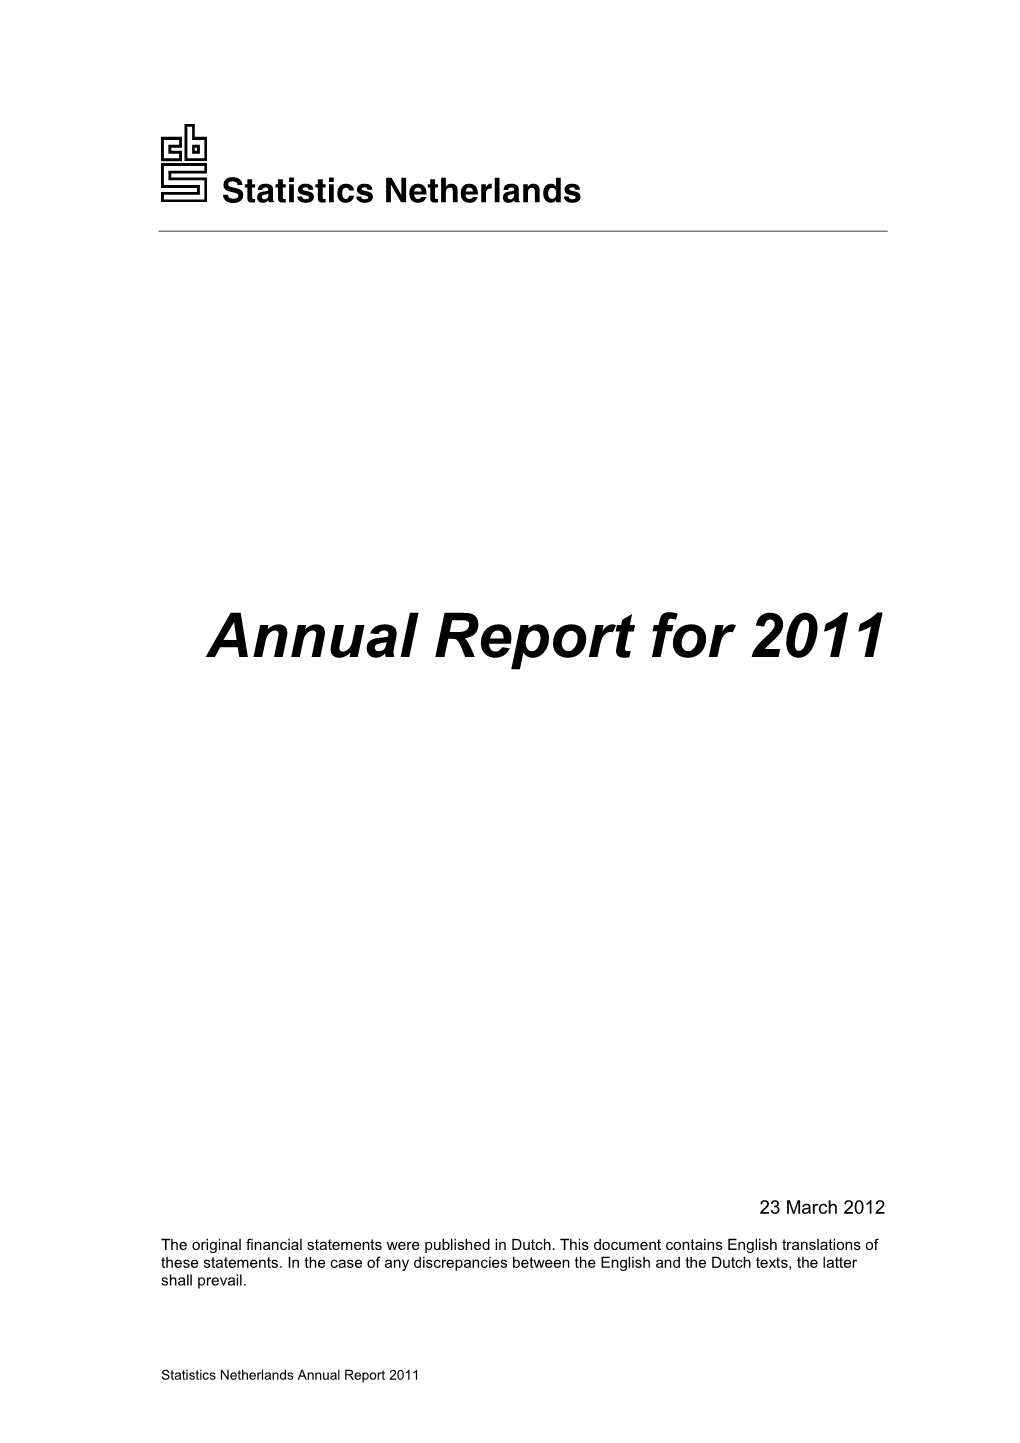 Statistics Netherlands Annual Report for 2011